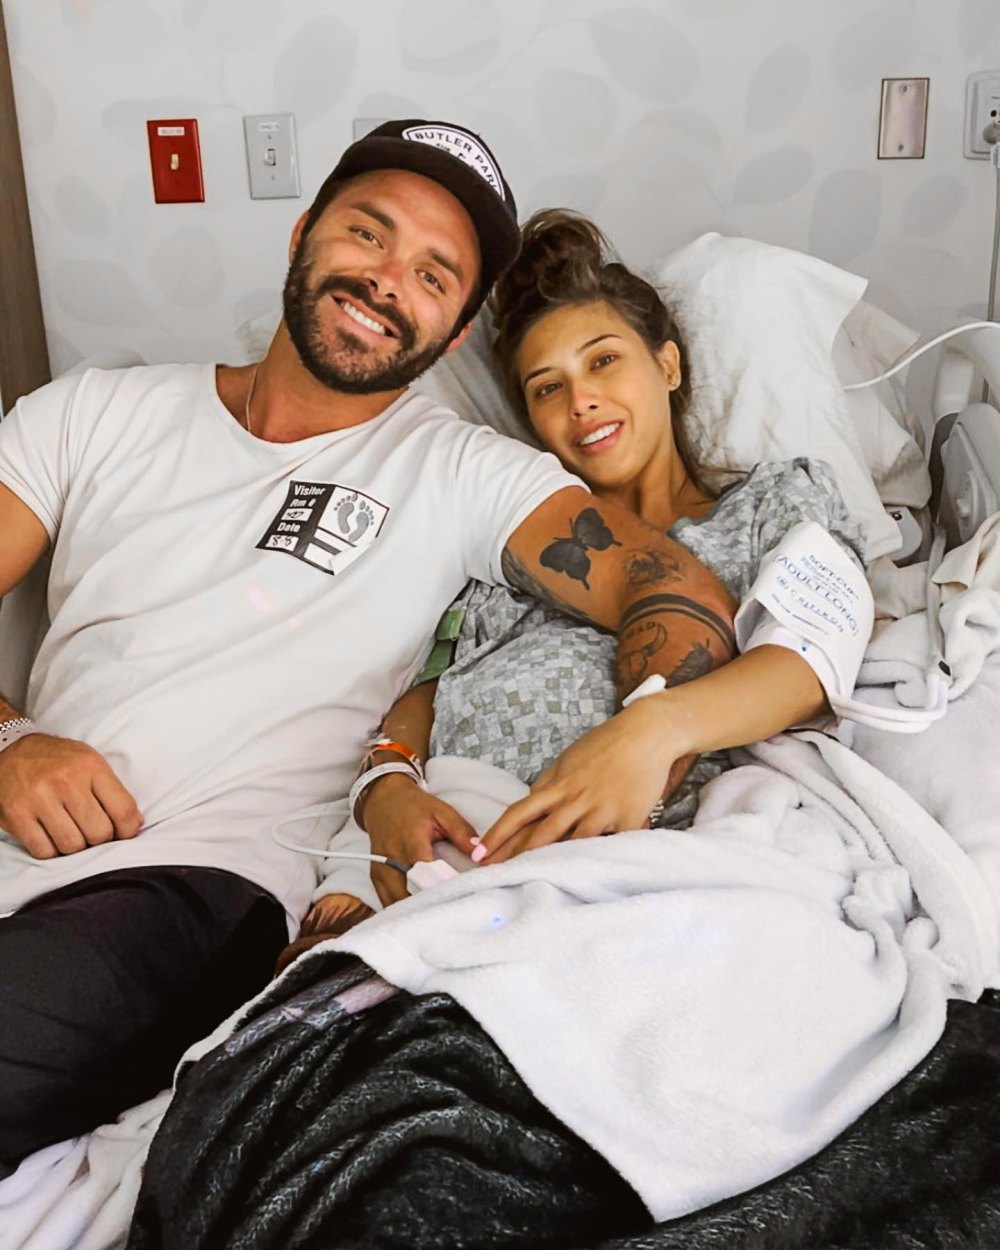 The Ultimatum's April Marie Gives Birth to 1st Baby, Welcomes Daughter With Boyfriend Cody Cooper